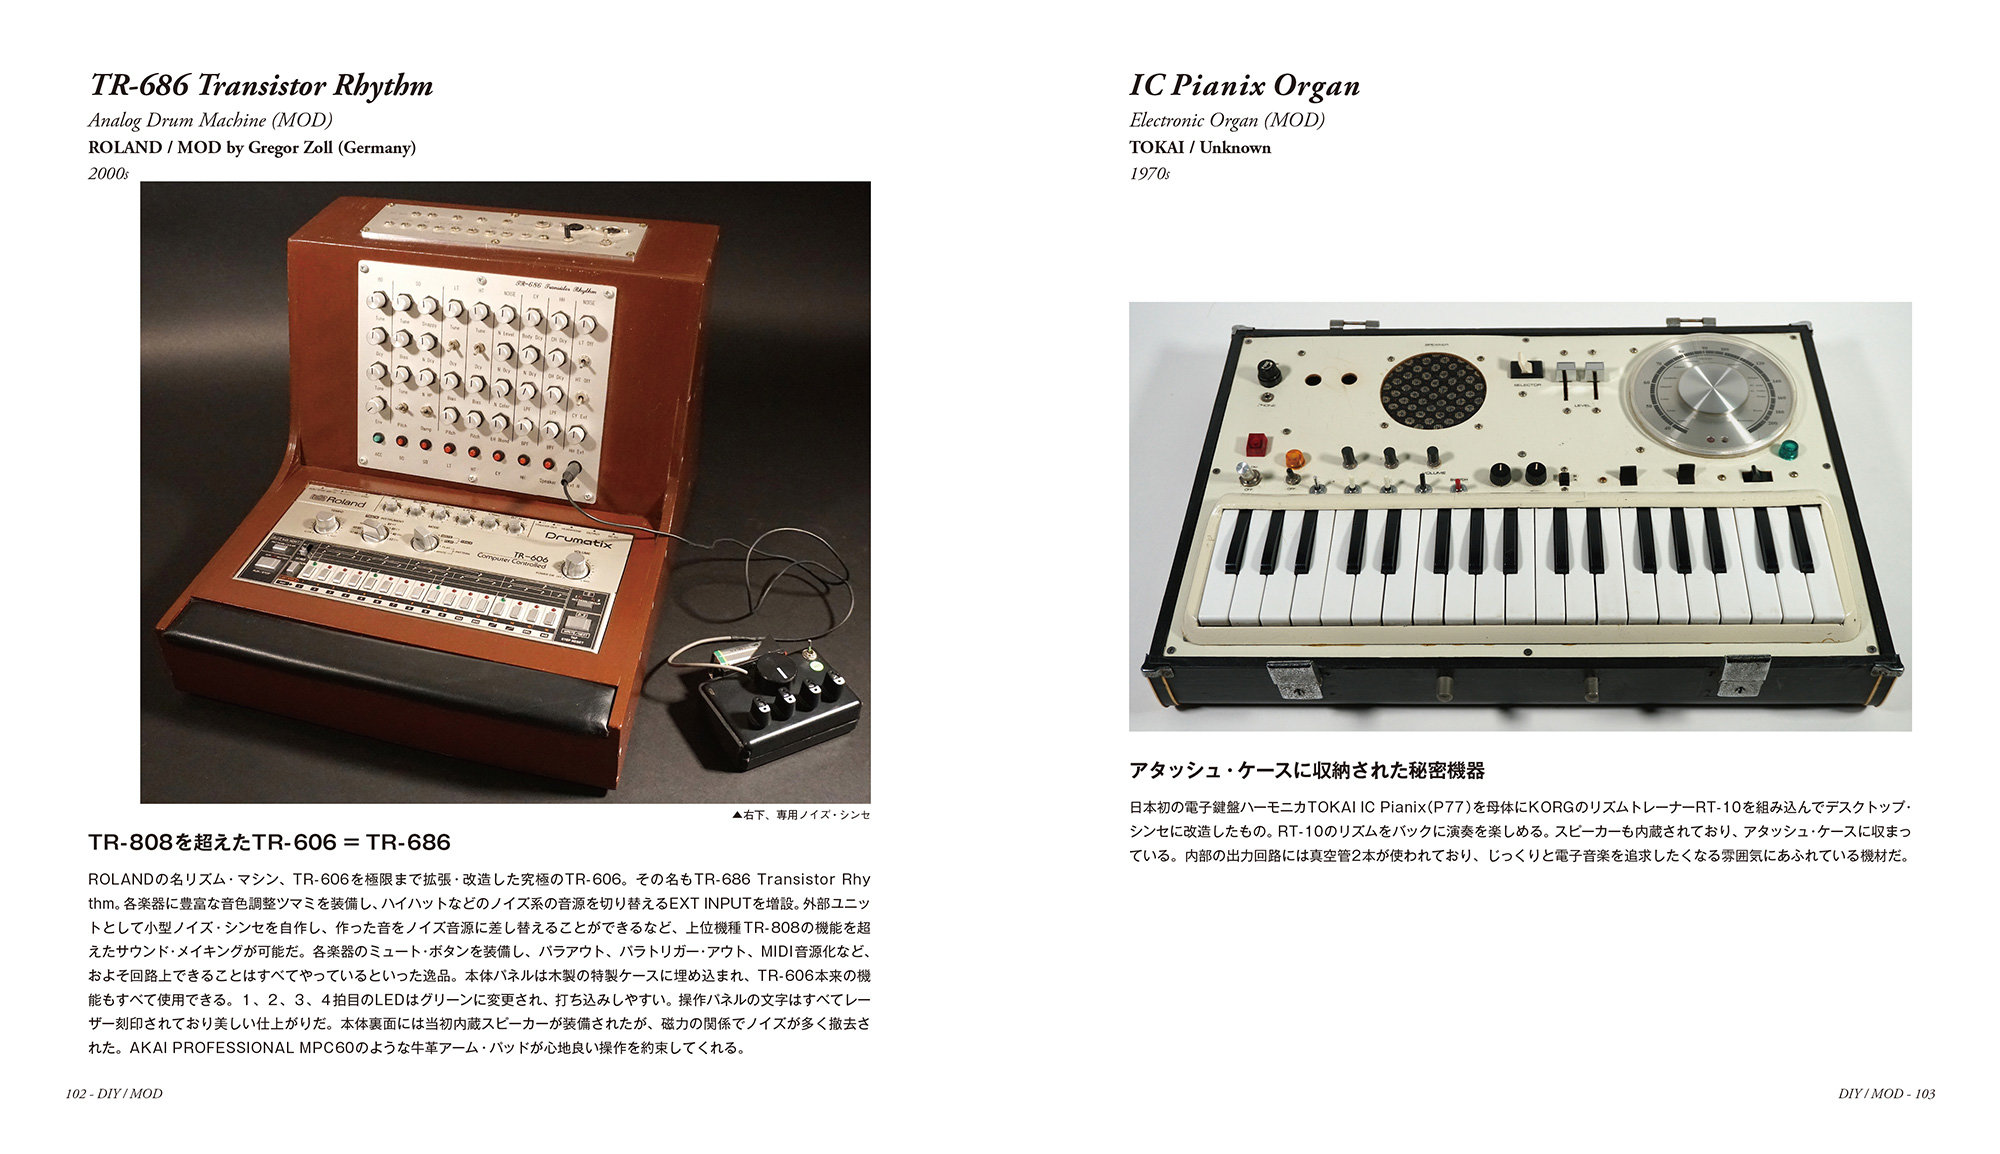 PC/タブレット 電子ブックリーダー 珍電子楽器LOVE STRANGE SYNTHESIZERS OF JAPAN -HIROMICHI OOHASHI 